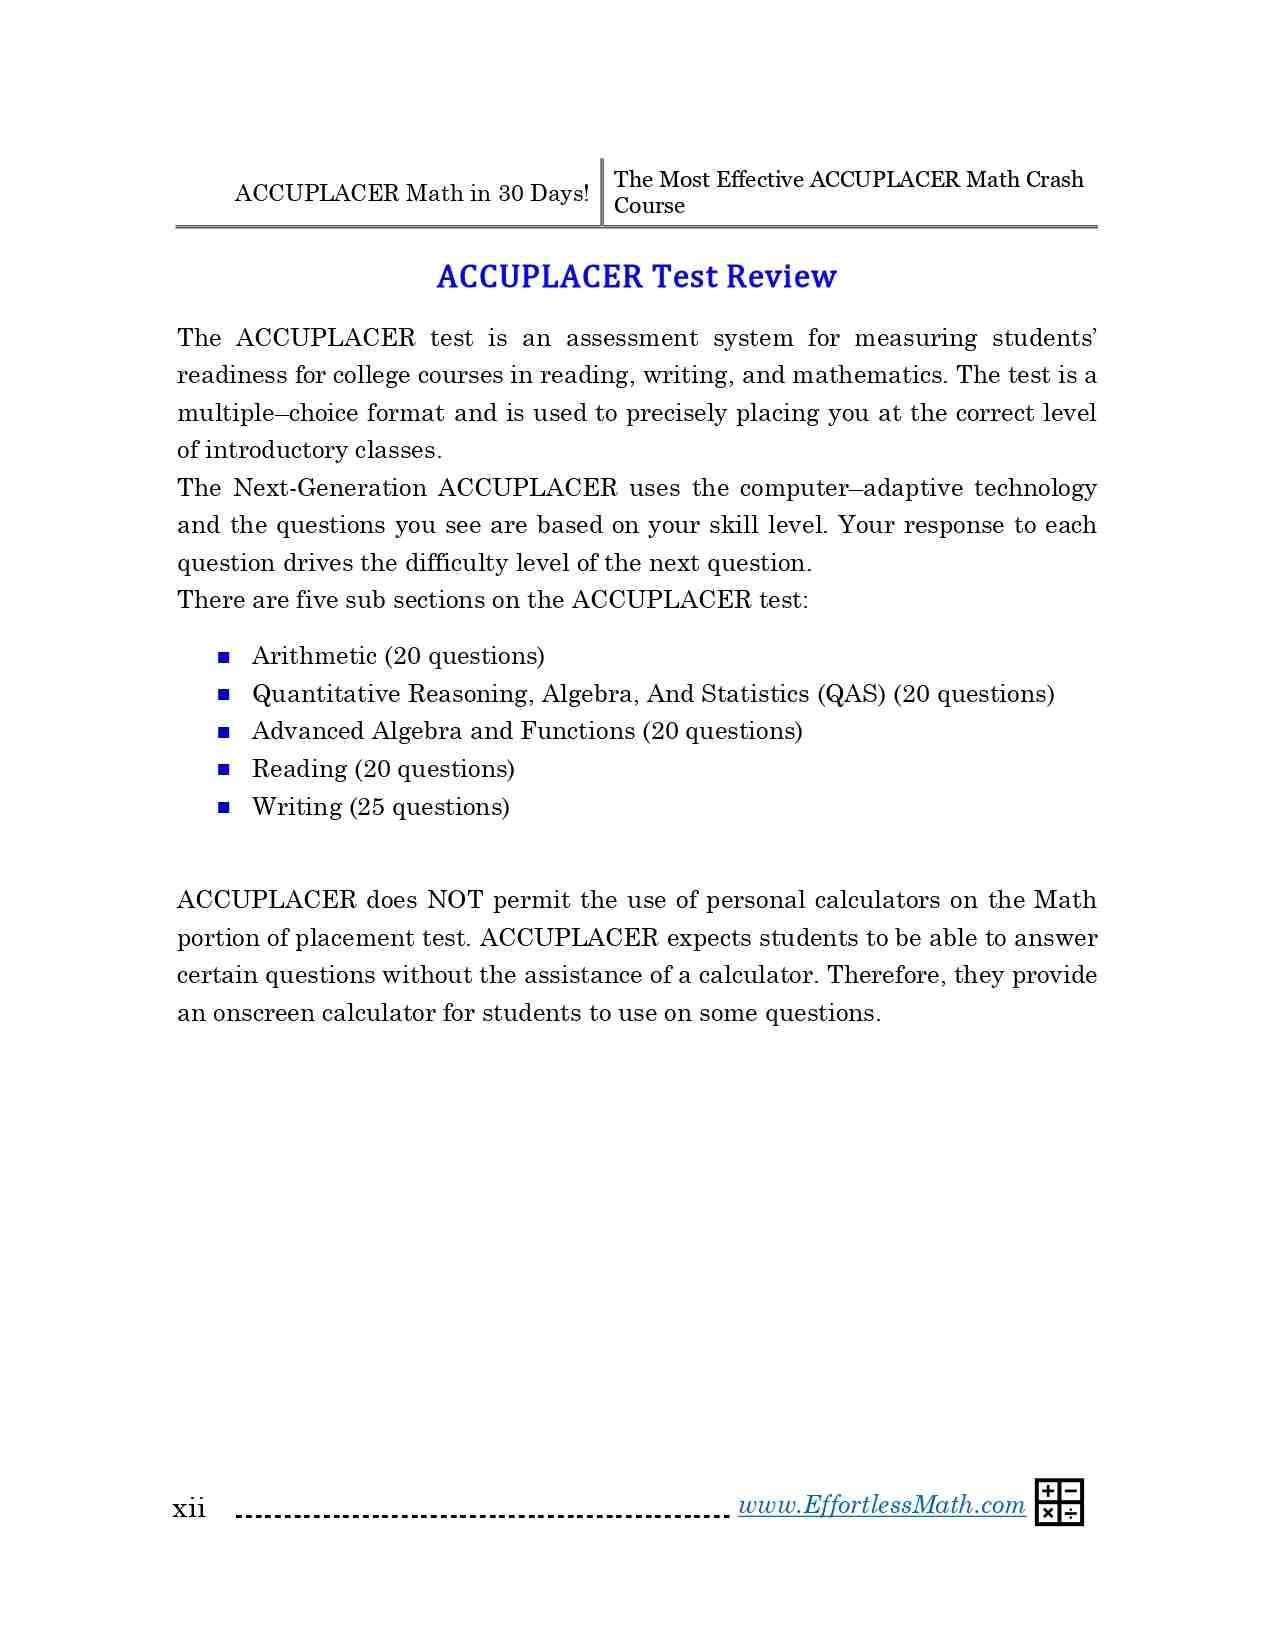 accuplacer math study guide pdf